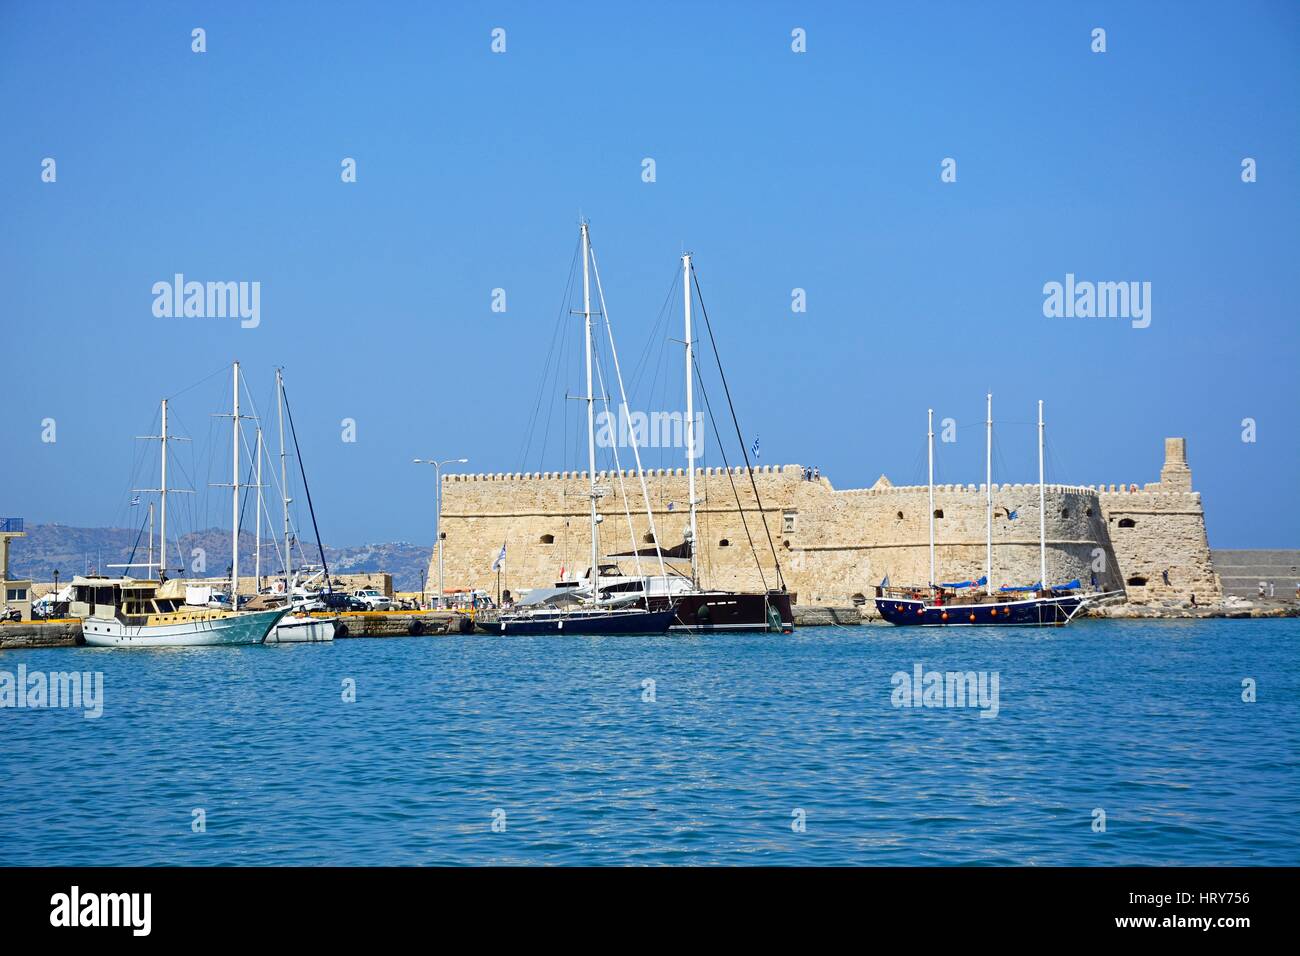 View of Koules castle with yachts in the harbour, Heraklion, Crete, Greece, Europe. Stock Photo